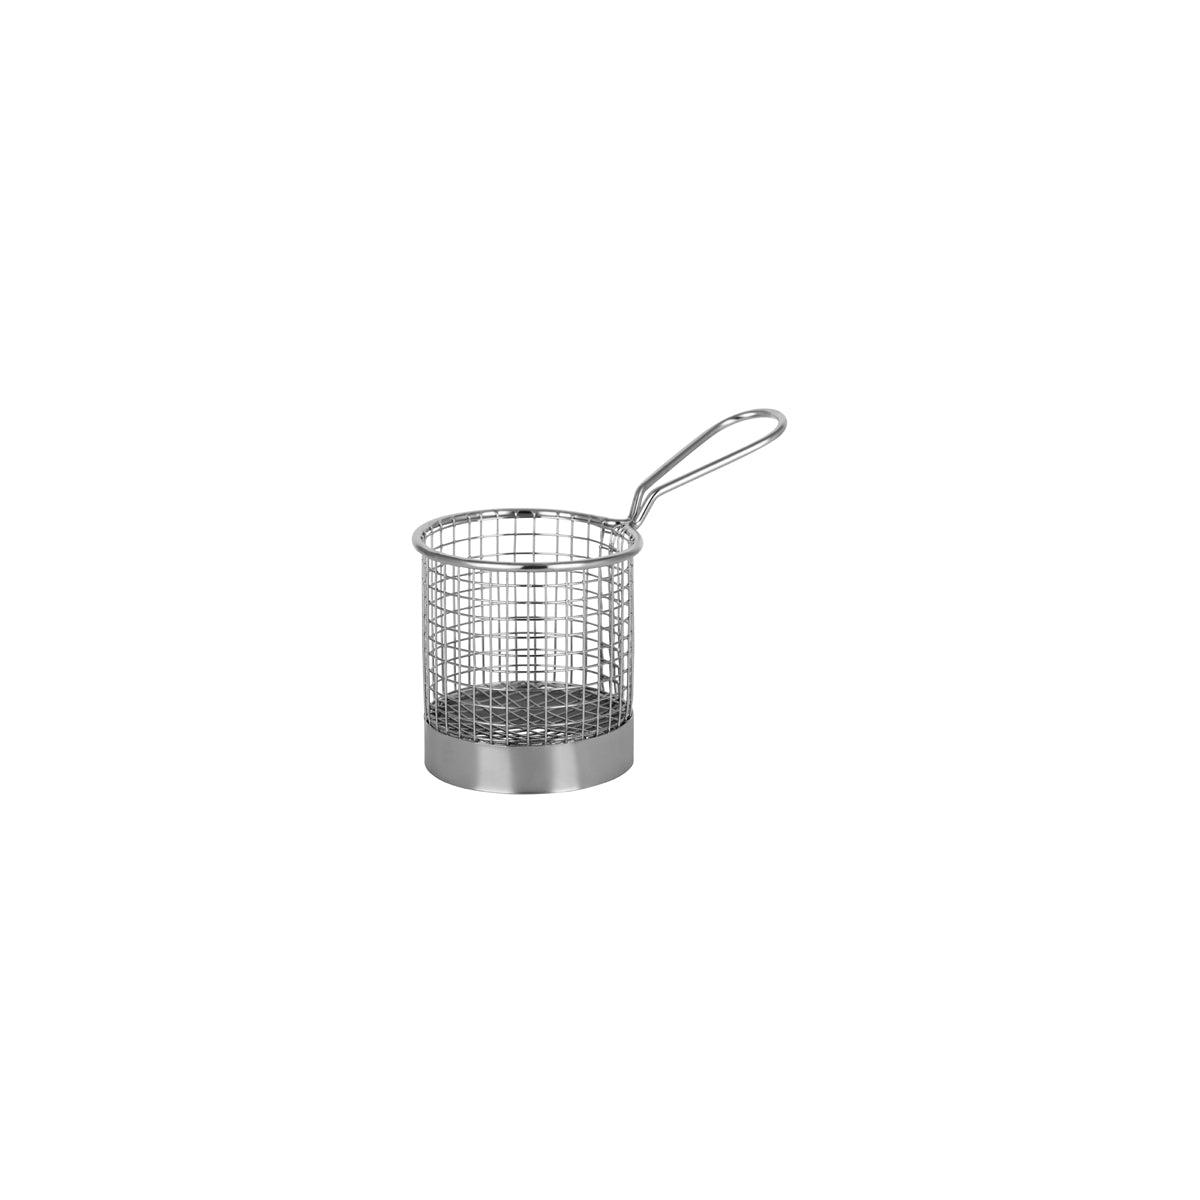 '07682 Chef Inox Wire Serving Basket Round with Handle 90x95mm Tomkin Australia Hospitality Supplies